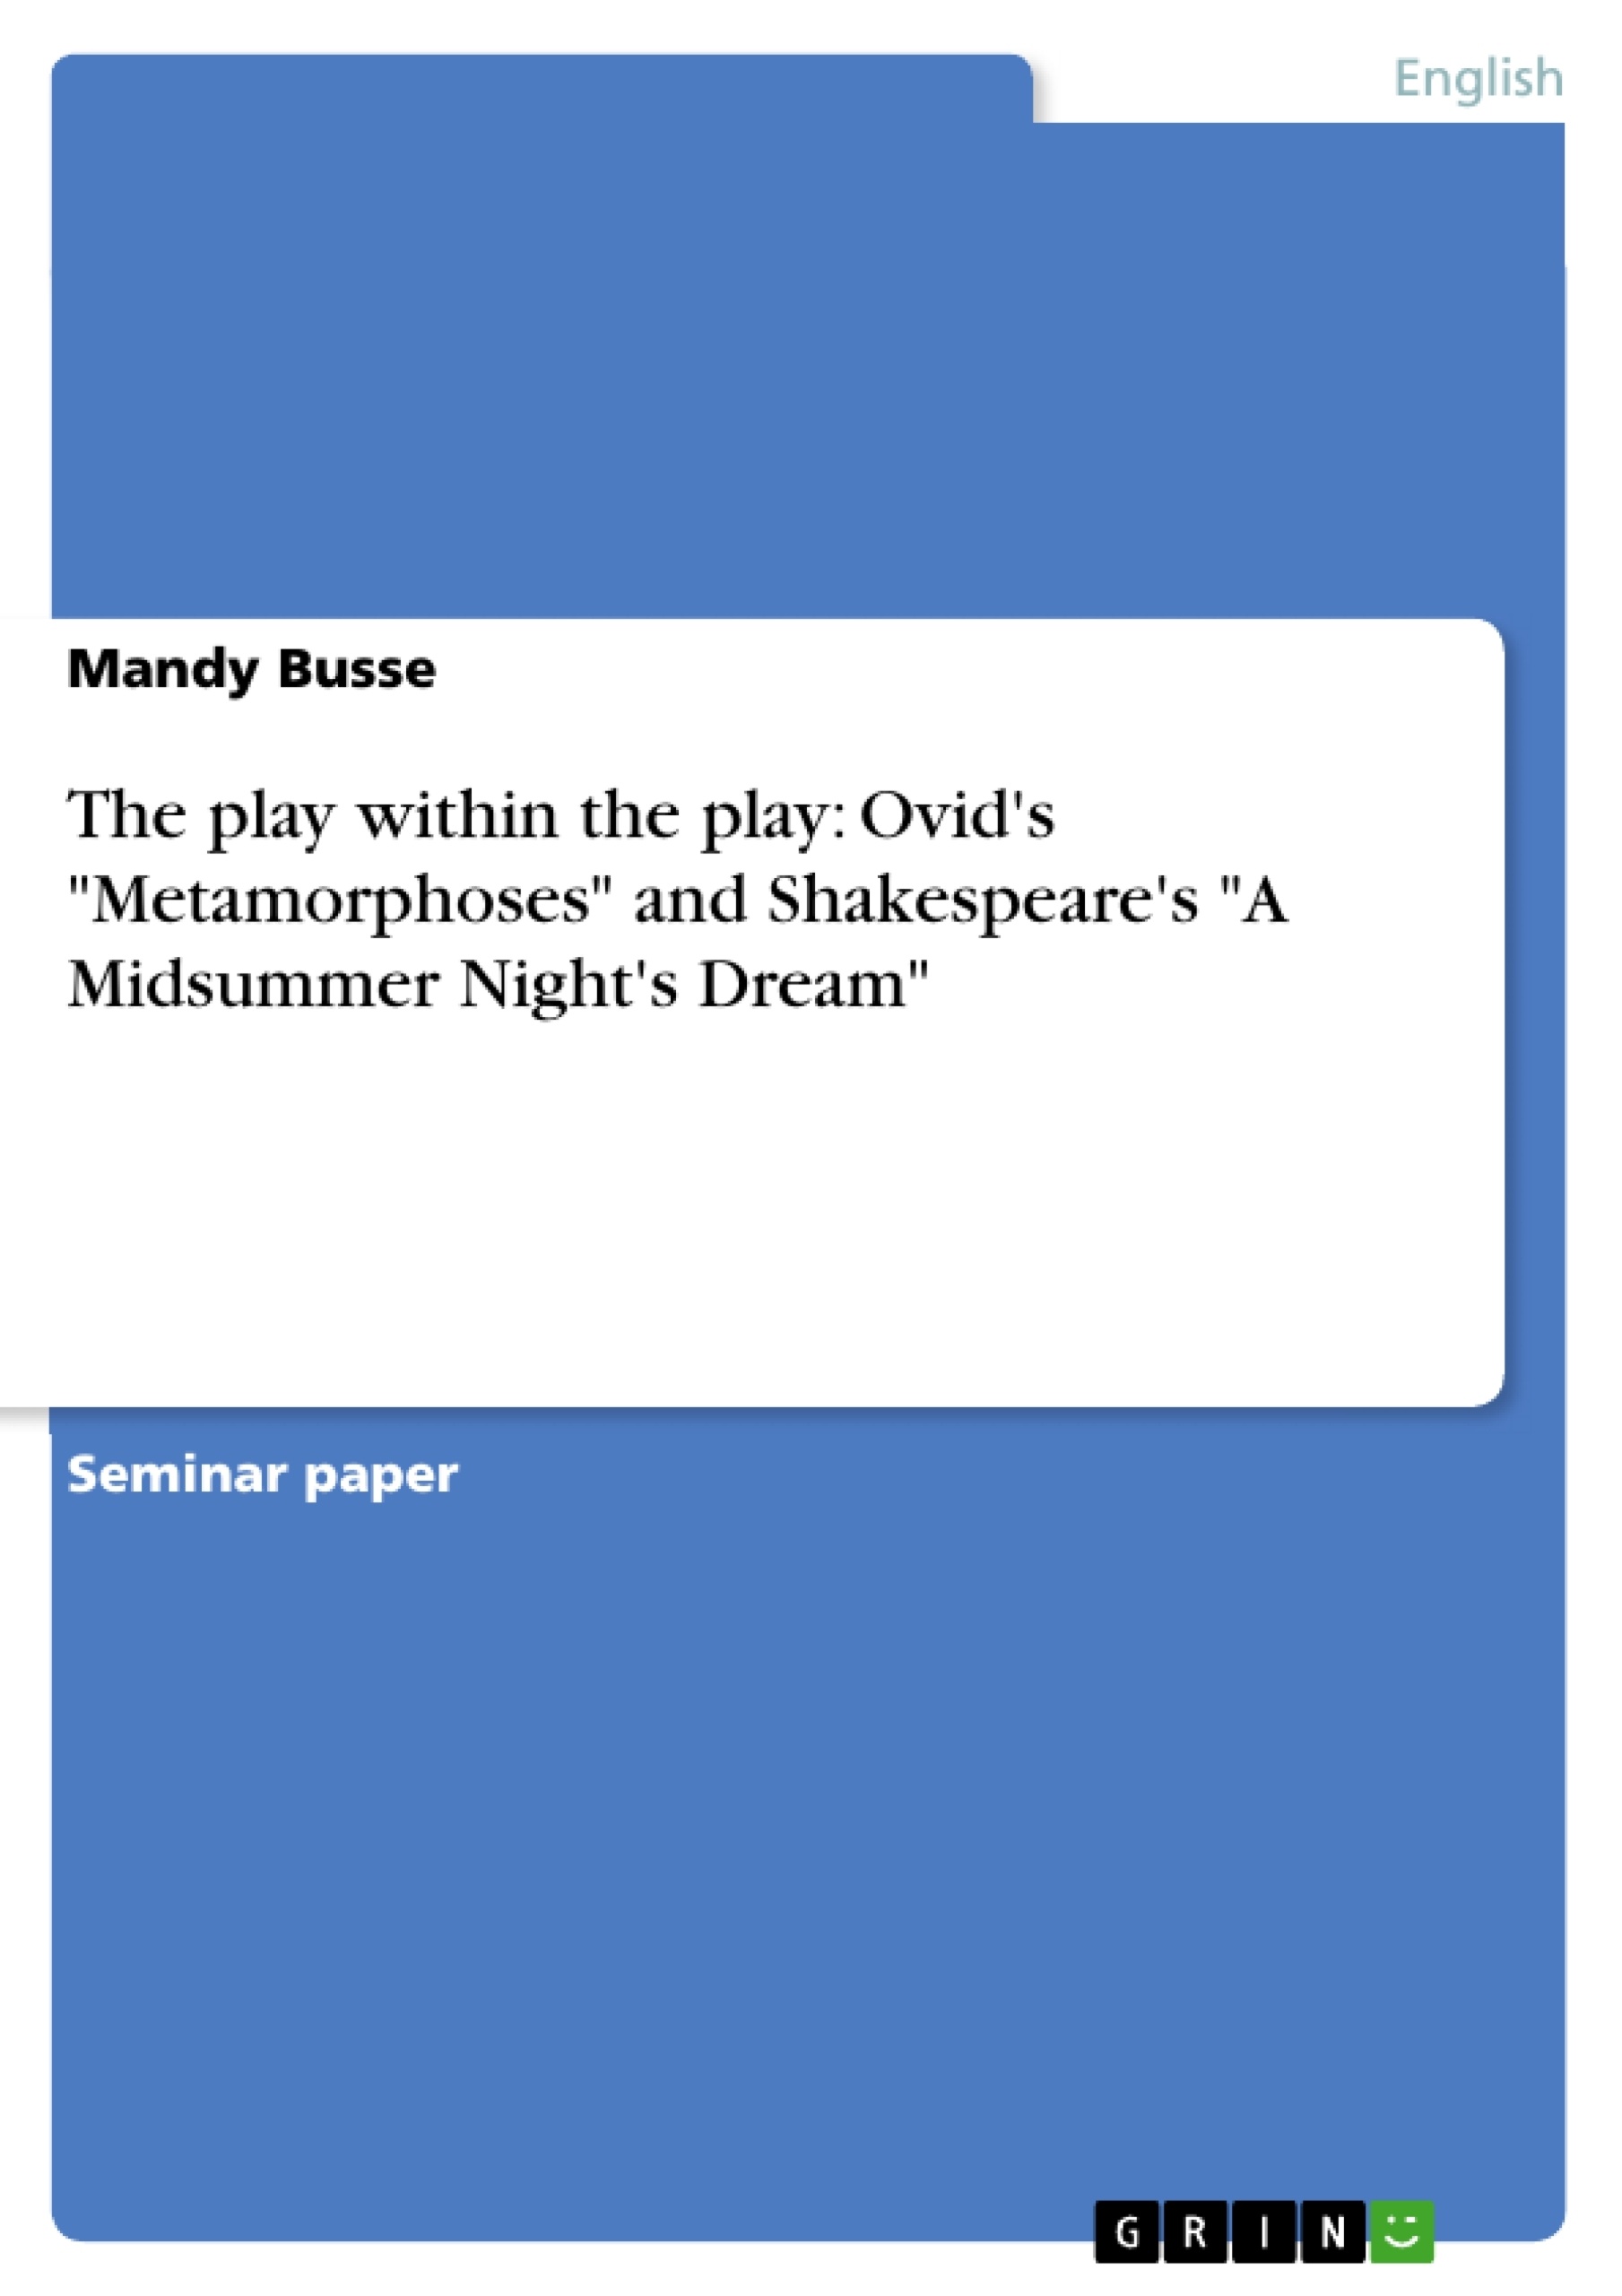 Title: The play within the play: Ovid's "Metamorphoses" and Shakespeare's "A Midsummer Night's Dream"